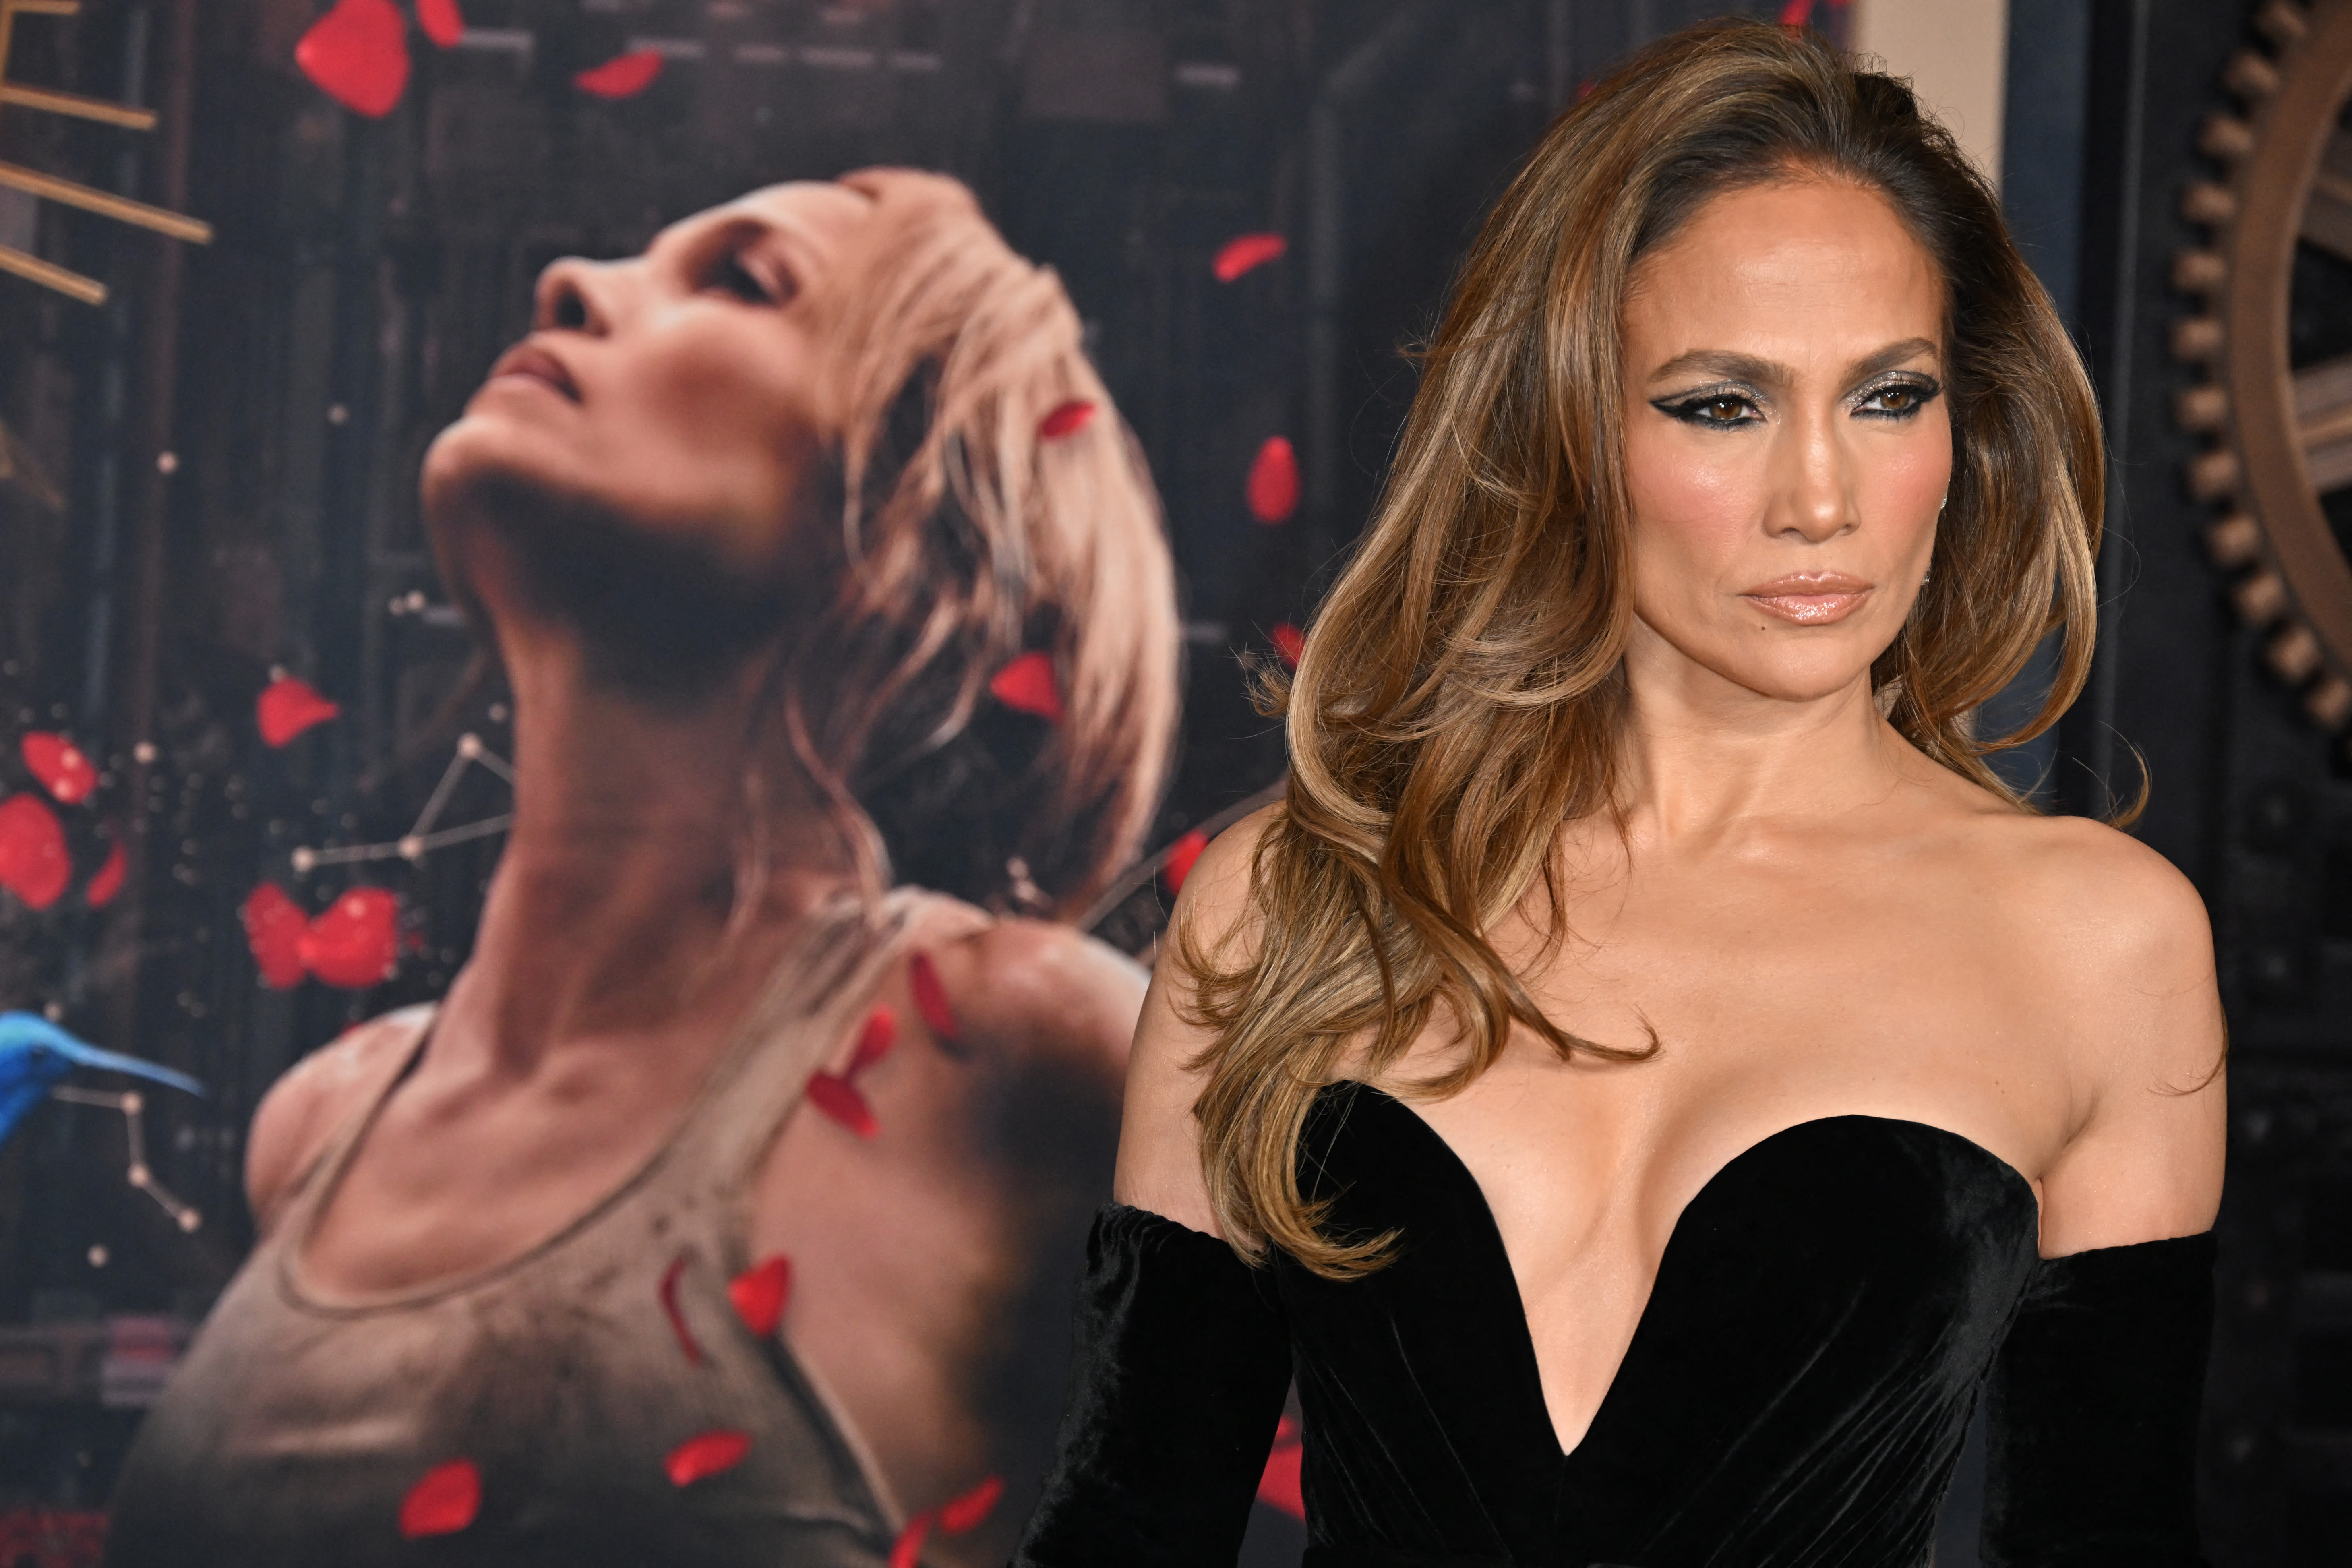 A timeline of Jennifer Lopez's 'This Is Me … Now' tour: Rumors of marital tension, low ticket sales reported before cancellation